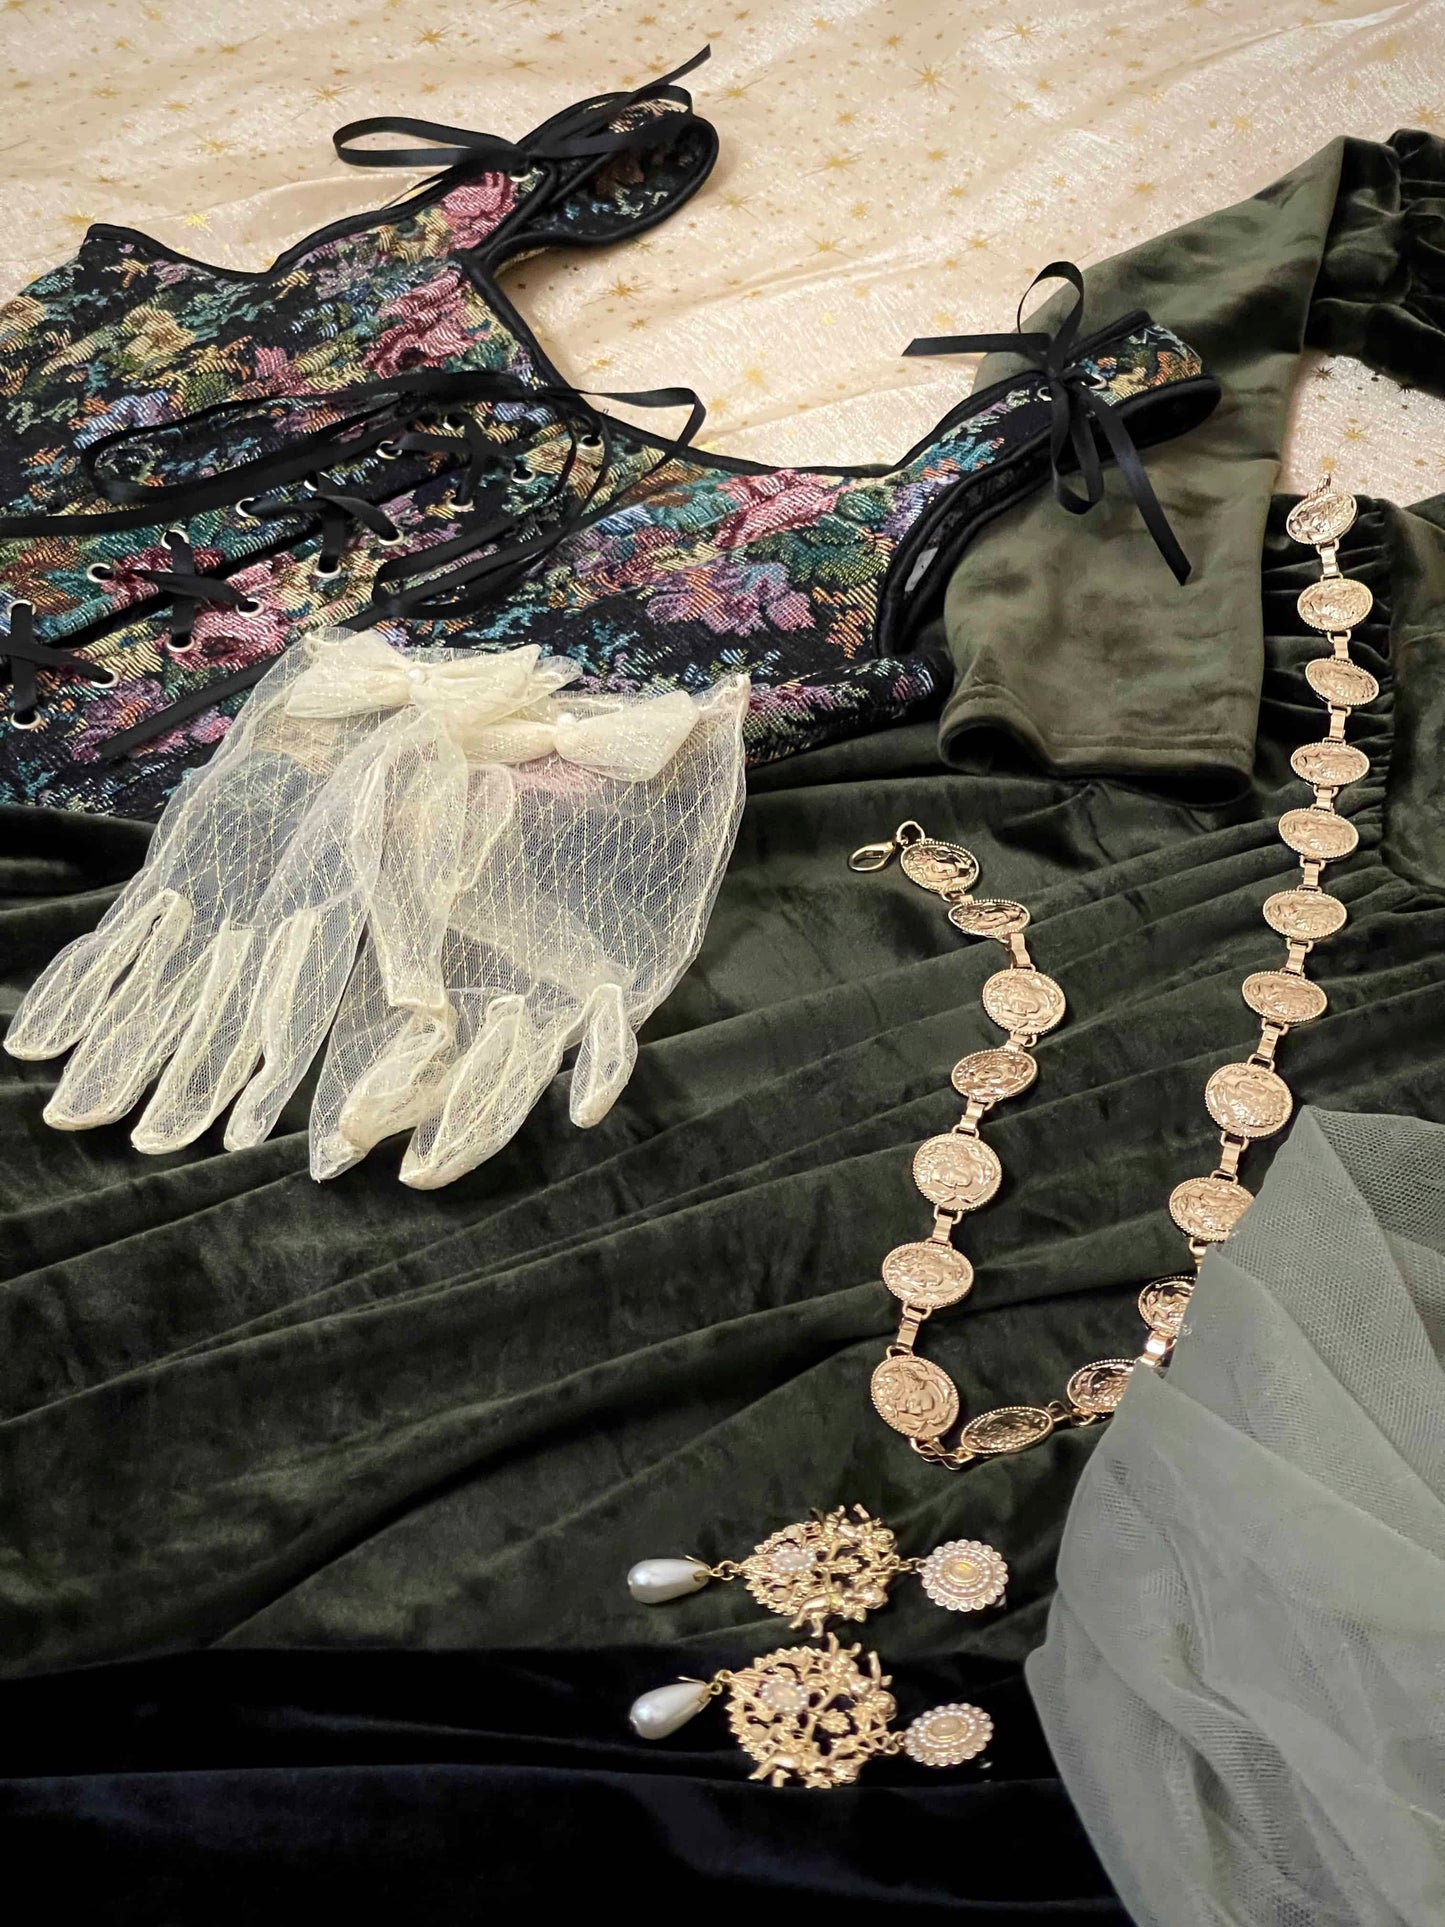 Detail of a historical fashion clothing and accessories style bundle mystery bag, including medieval, renaissance, baroque, tudor, rococo, regency, Victorian, Edwardian and fantasy styles.